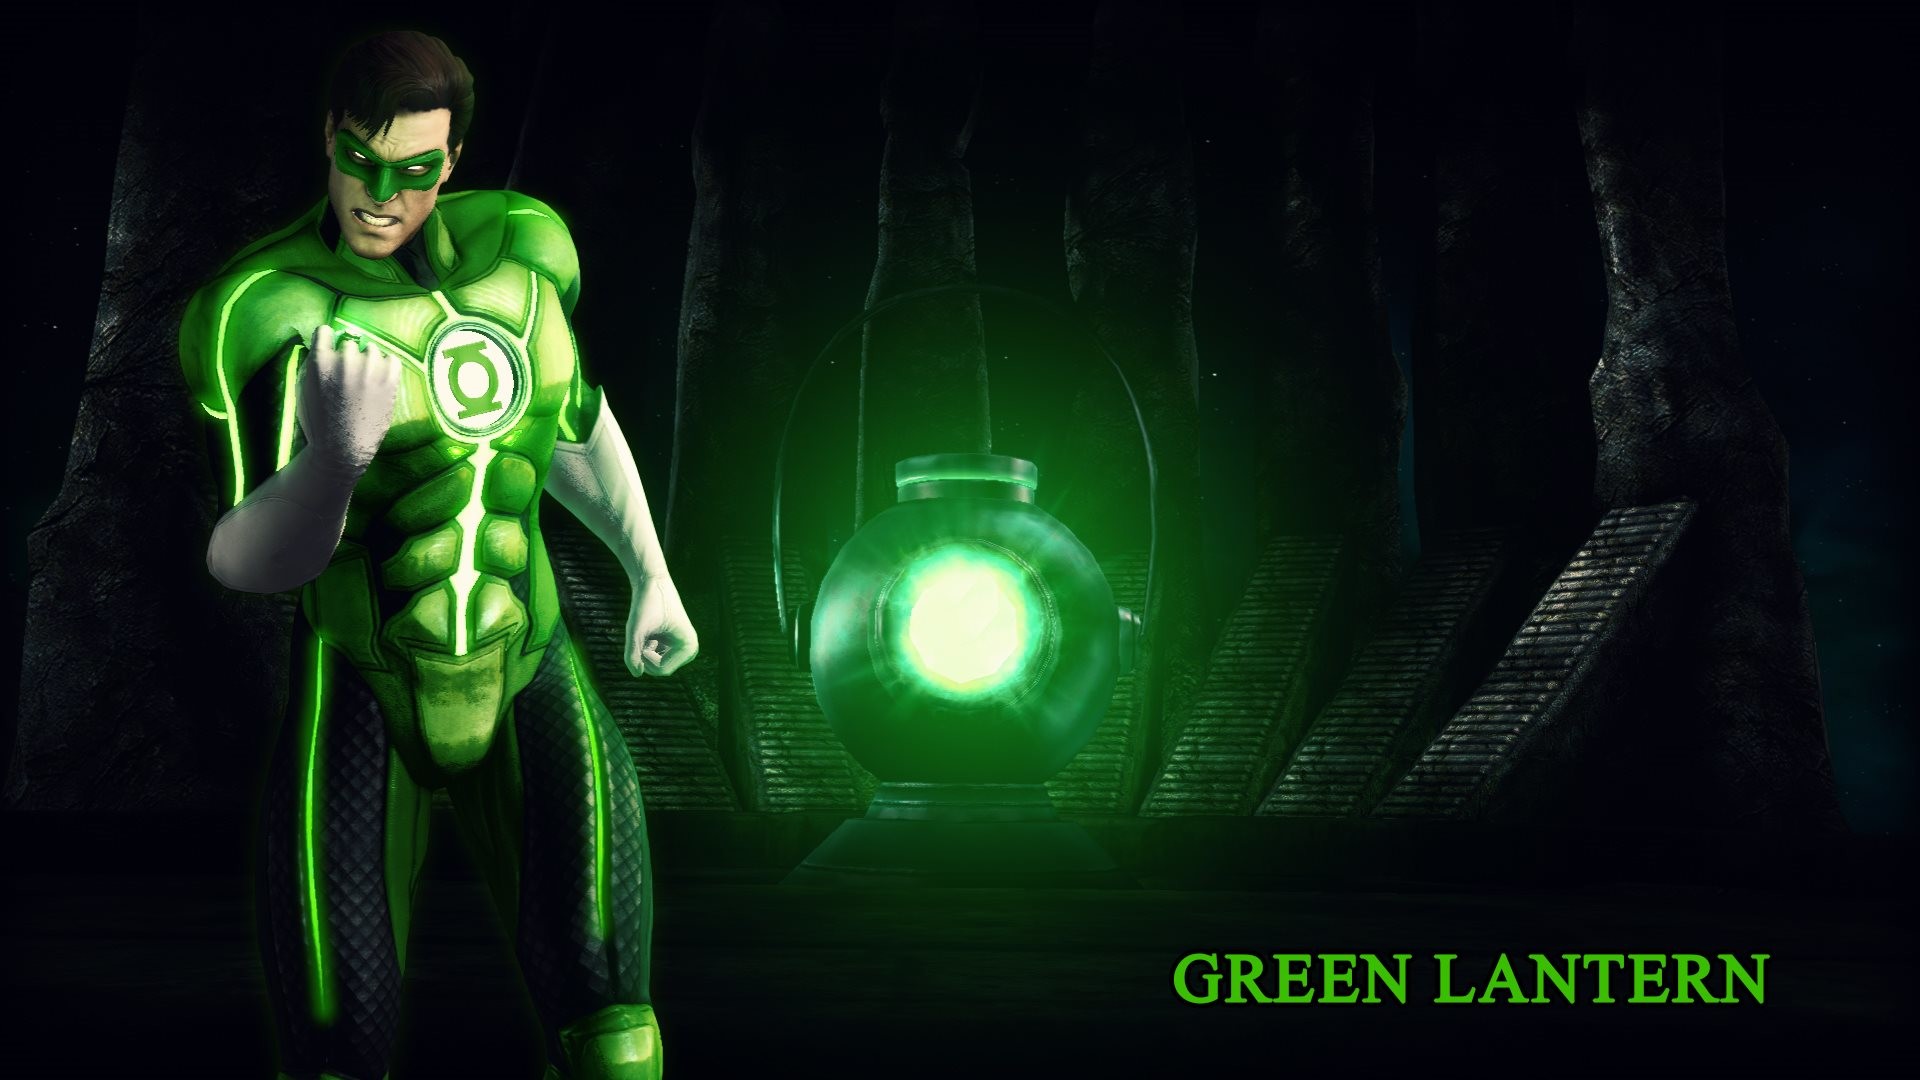 In the 3rd wallpaper is Green Lantern from Injustice – Gods Among Us